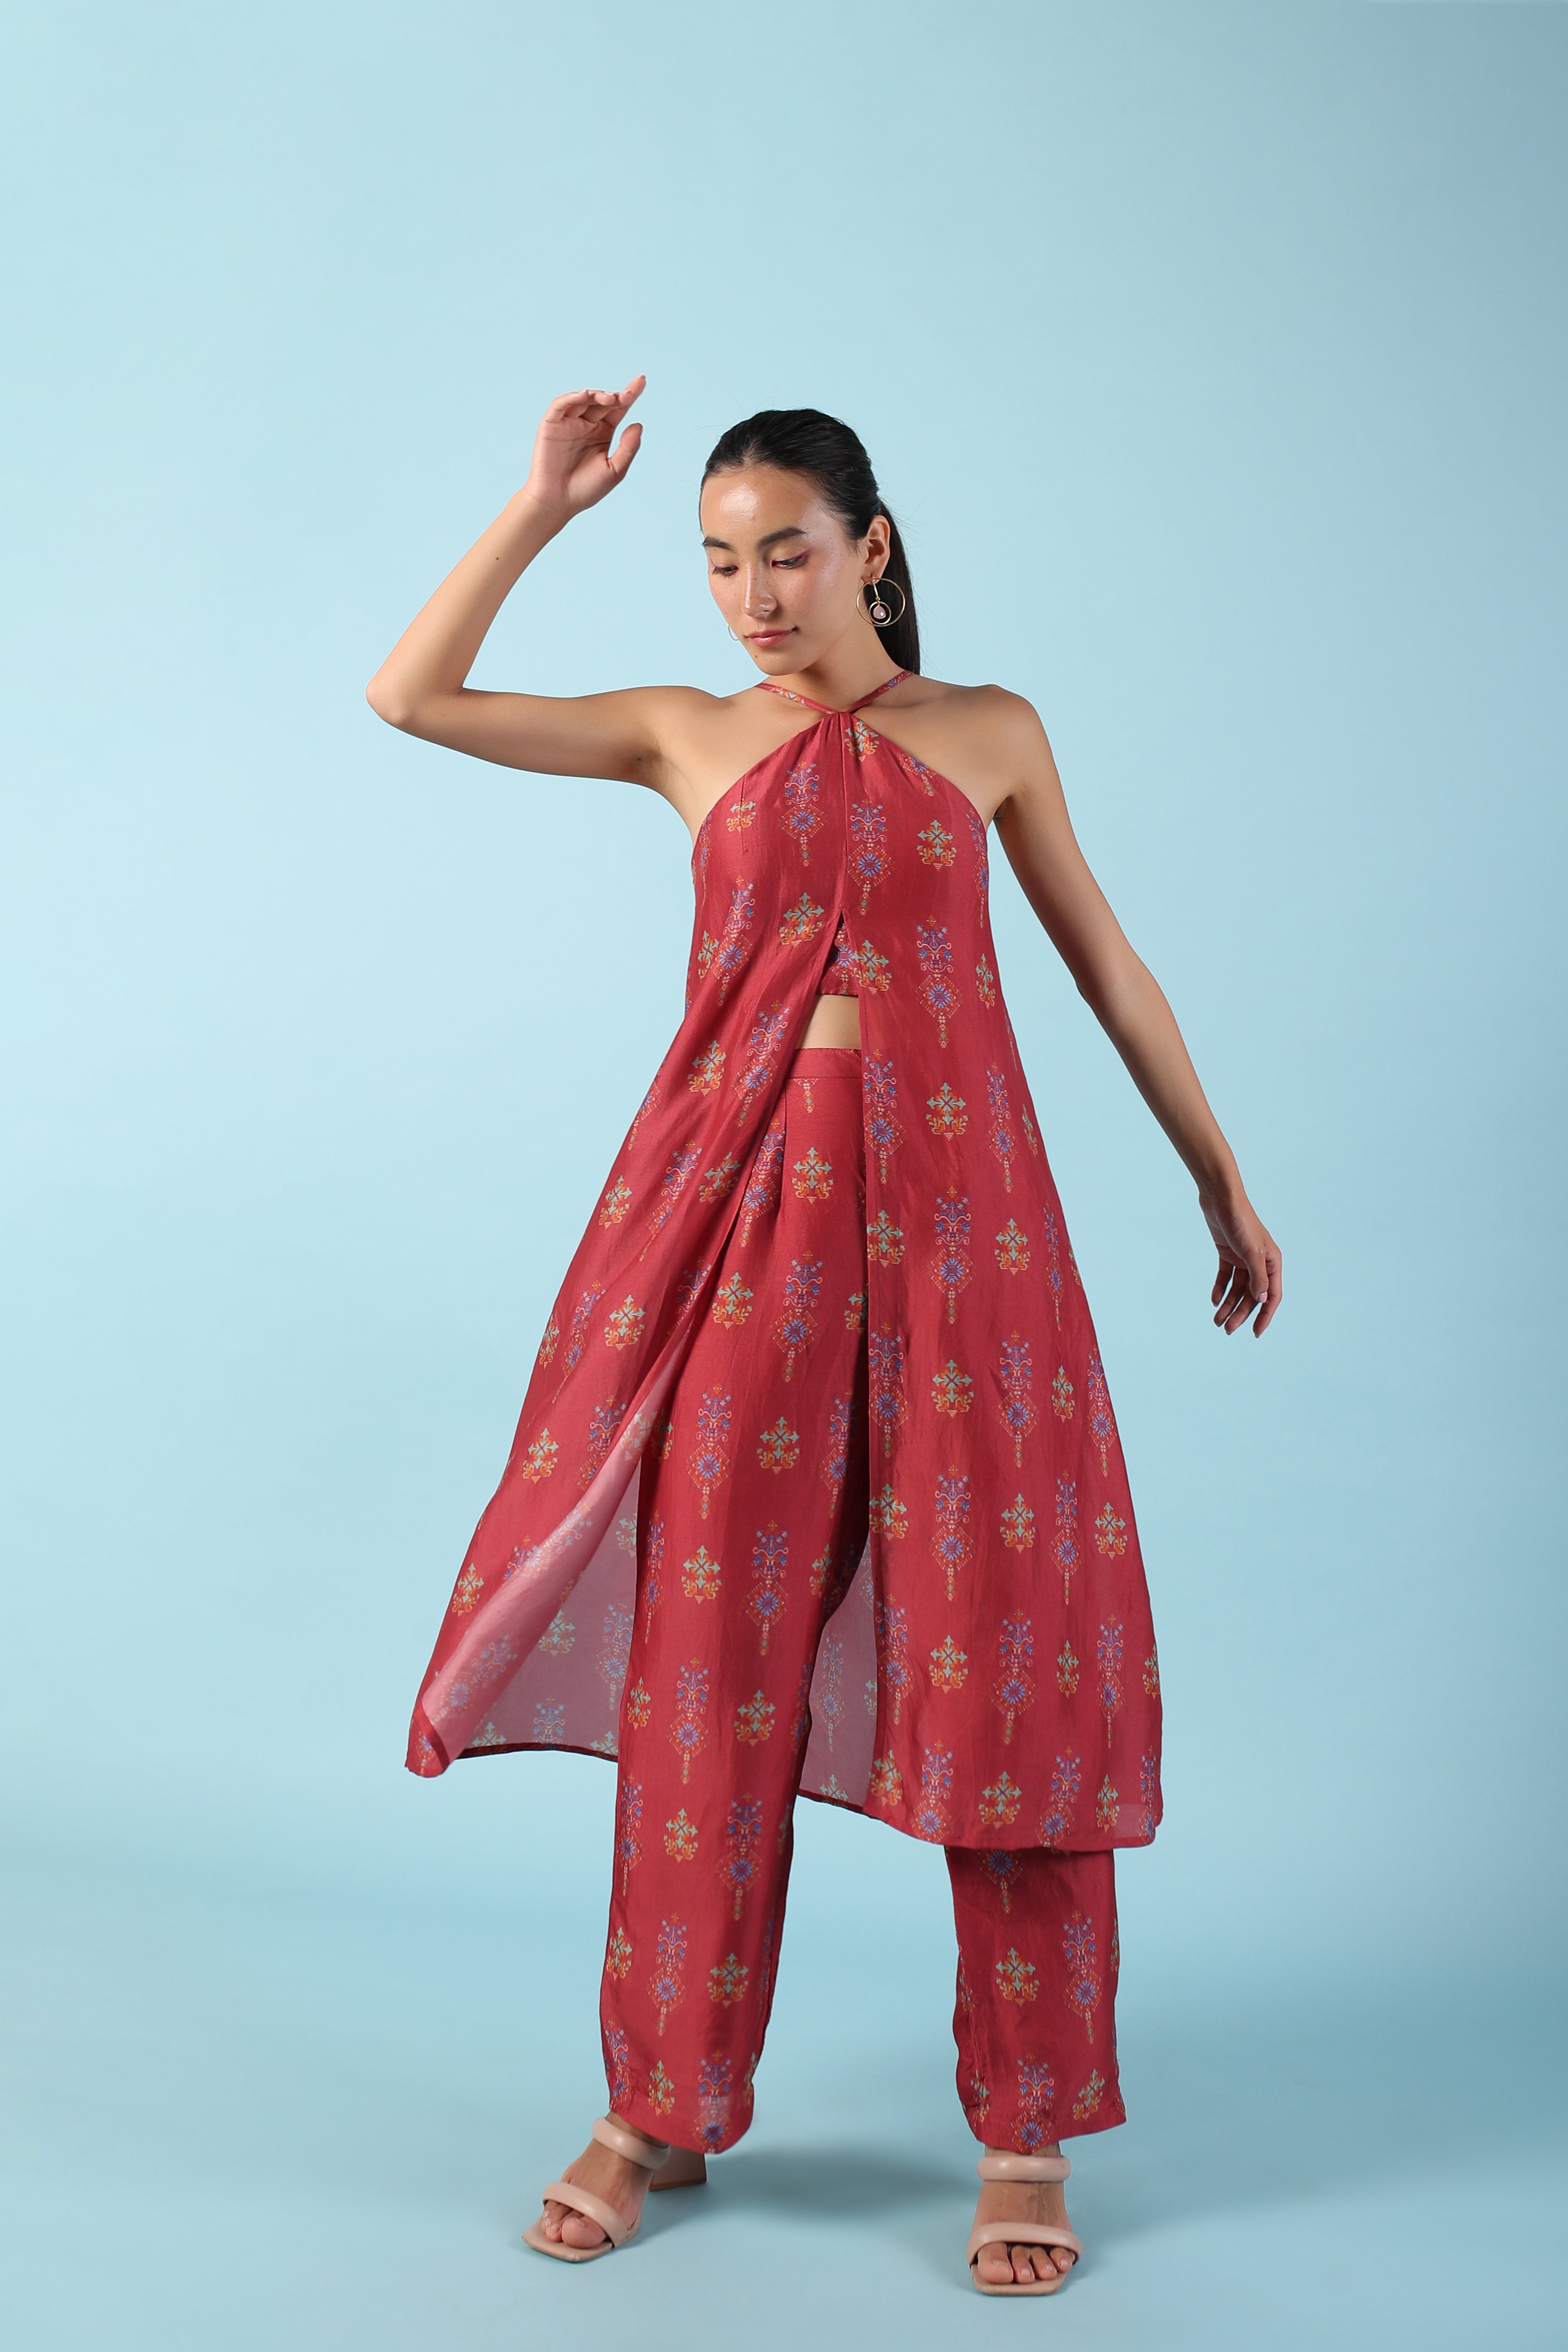 Scarlet red halter neck long tunic with pants